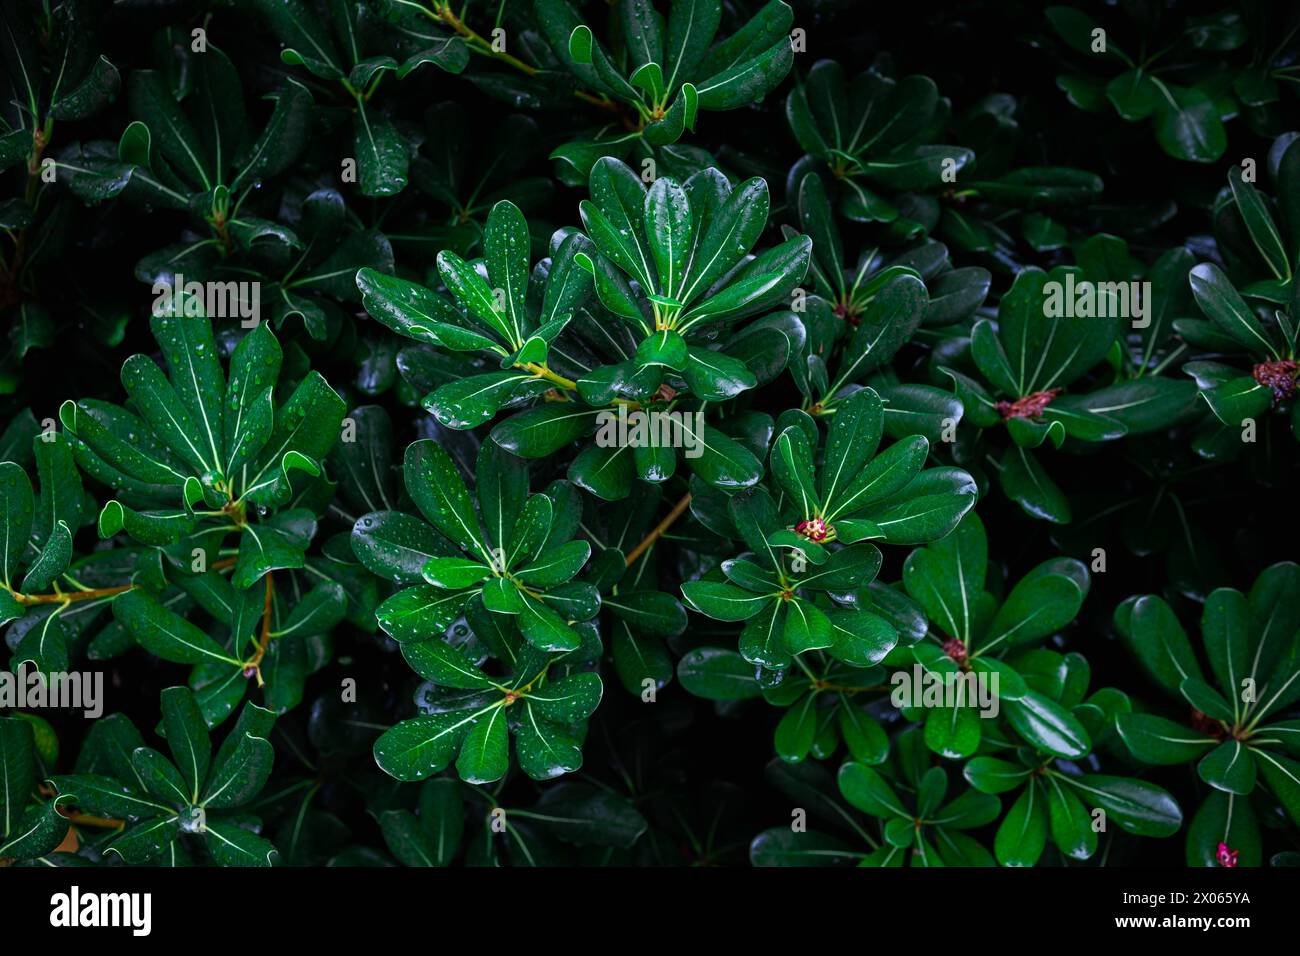 Lush green foliage with raindrops. Colorful, textured, contrasting image of the leaves of the Pittosporum tobira (Australian laurel) Stock Photo